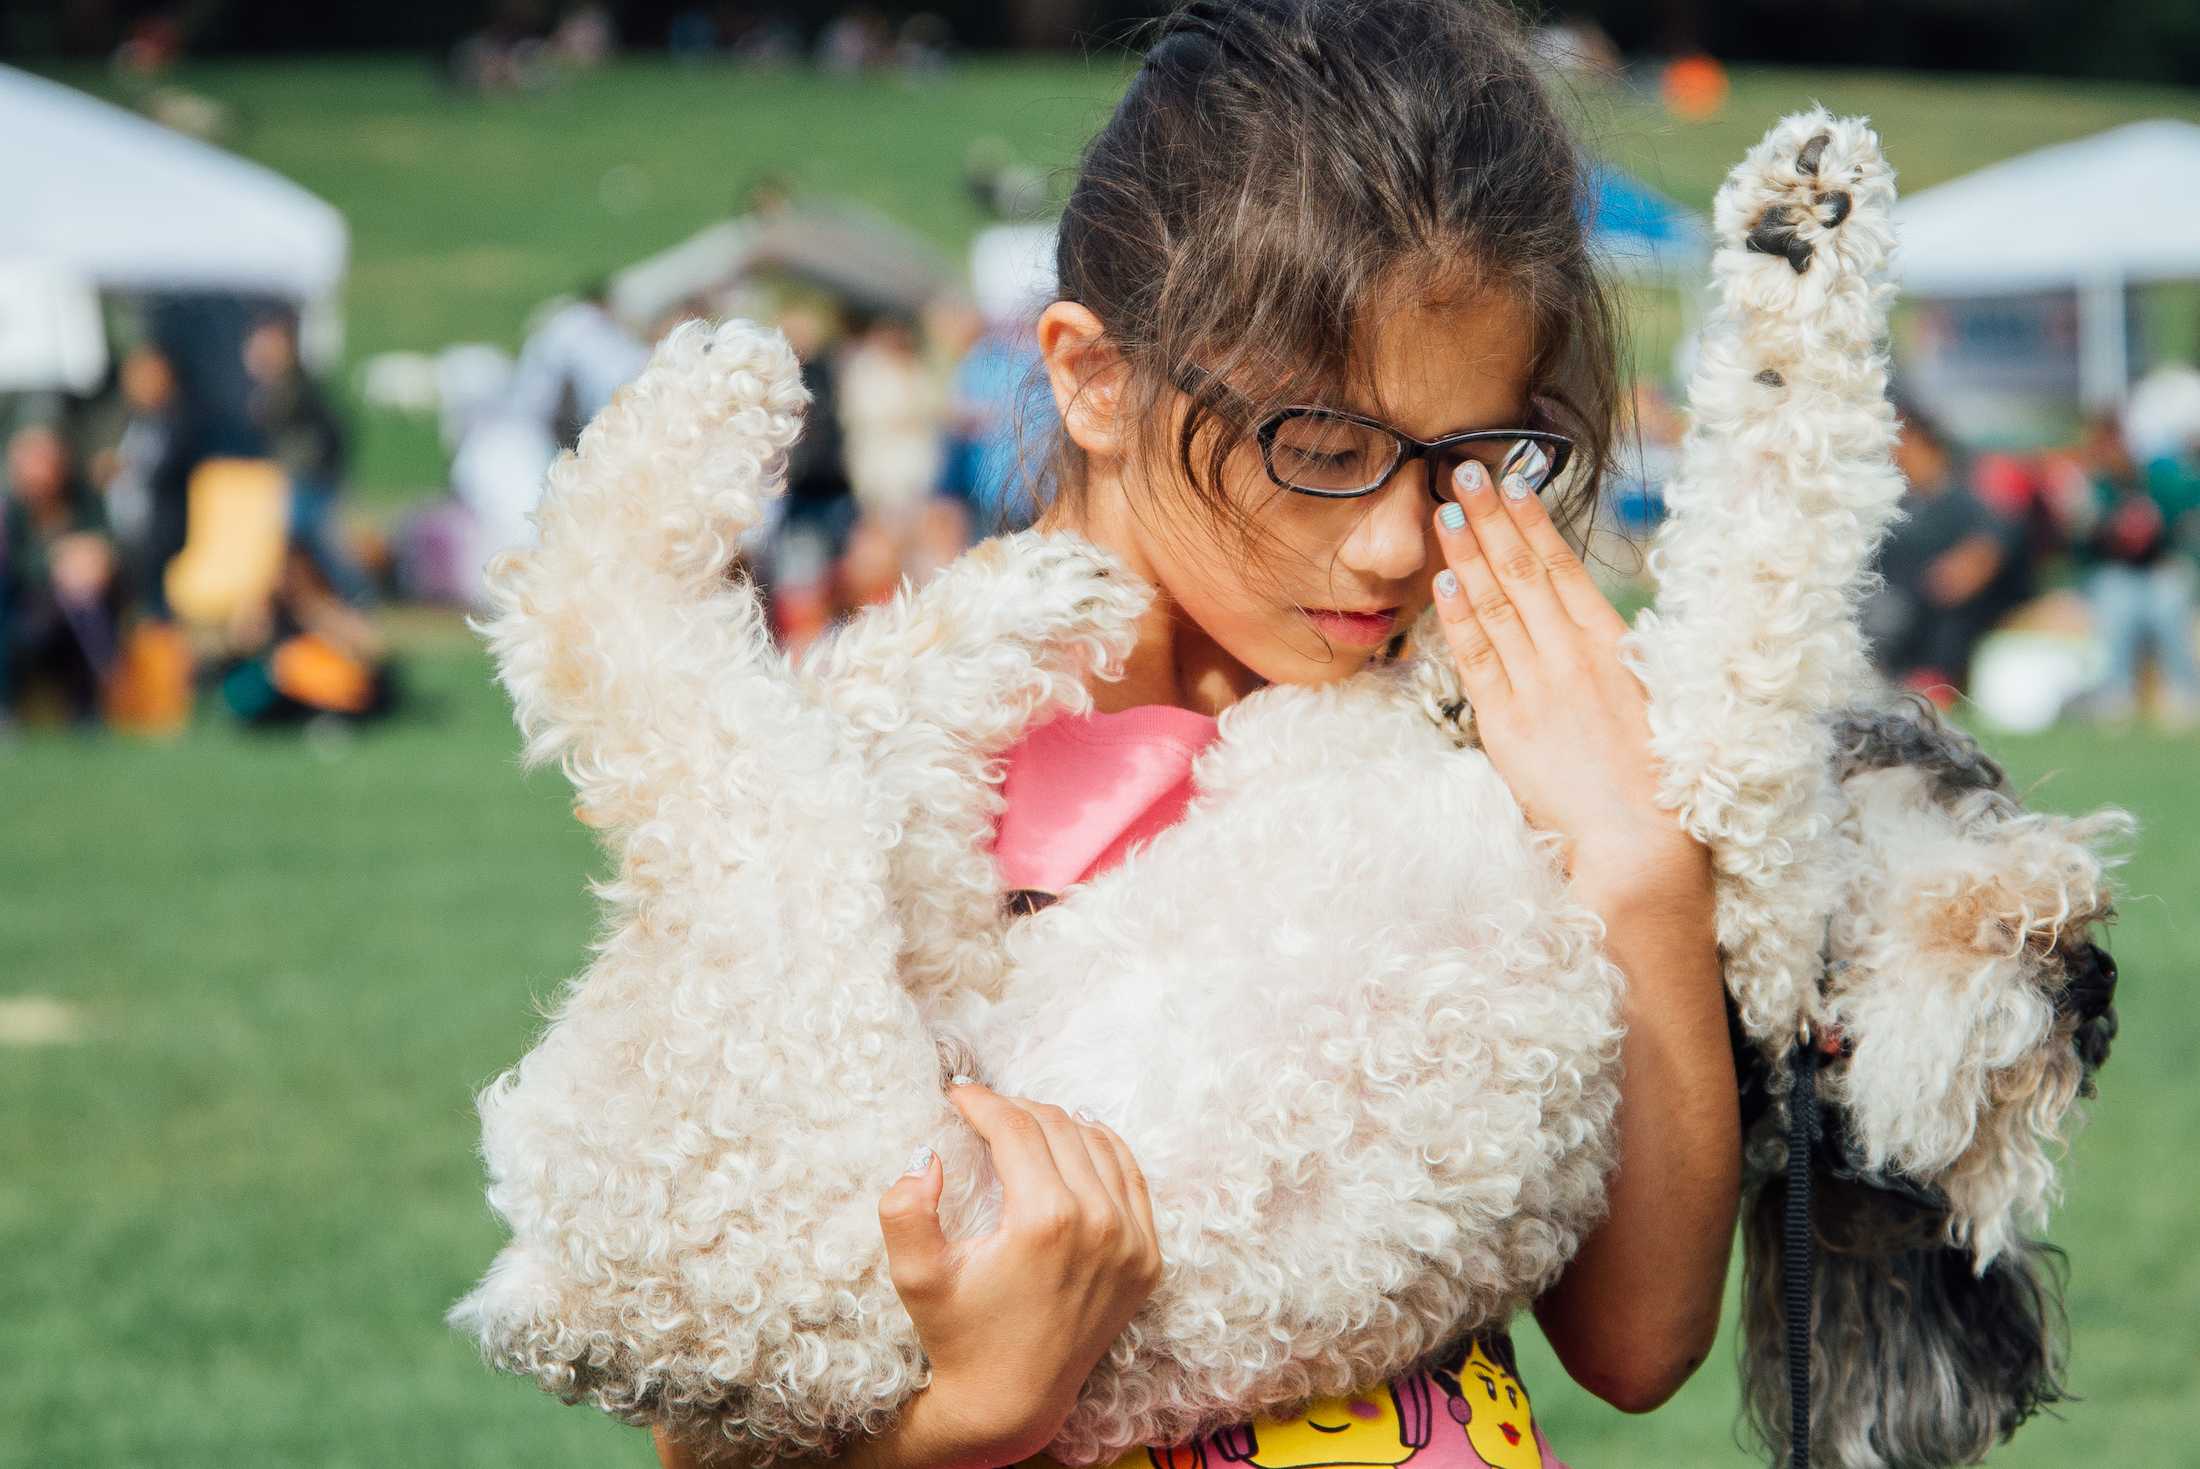 A young girl holds her dog at a Halloween pet costume festival.